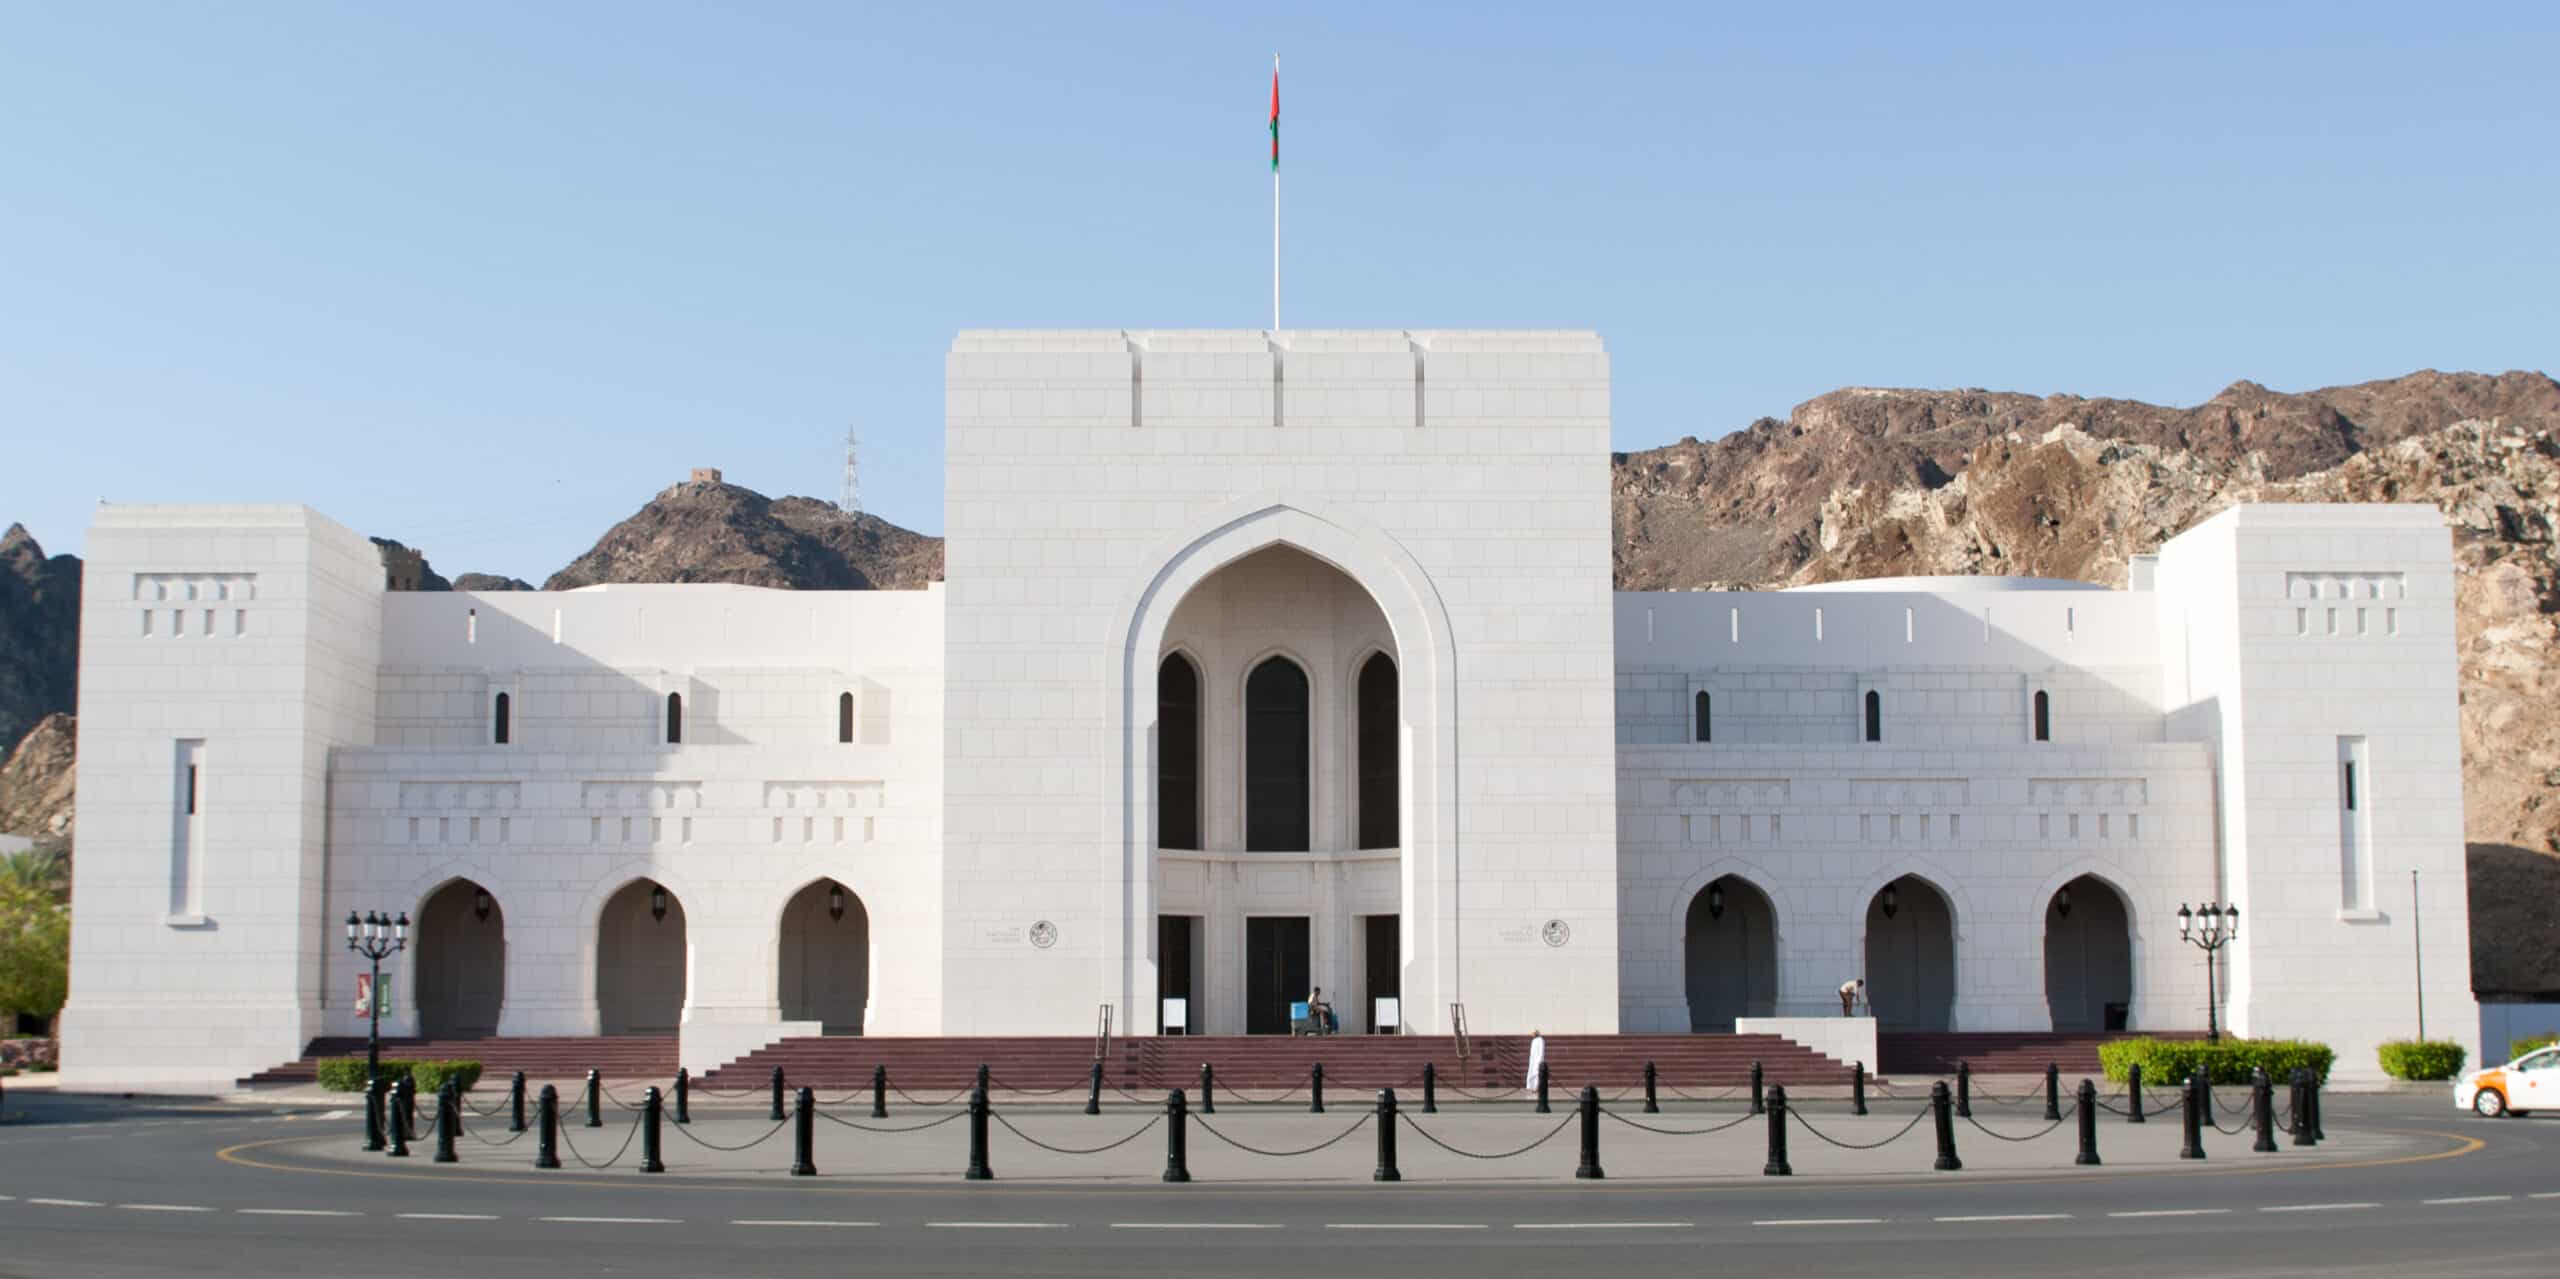 National museum of Oman